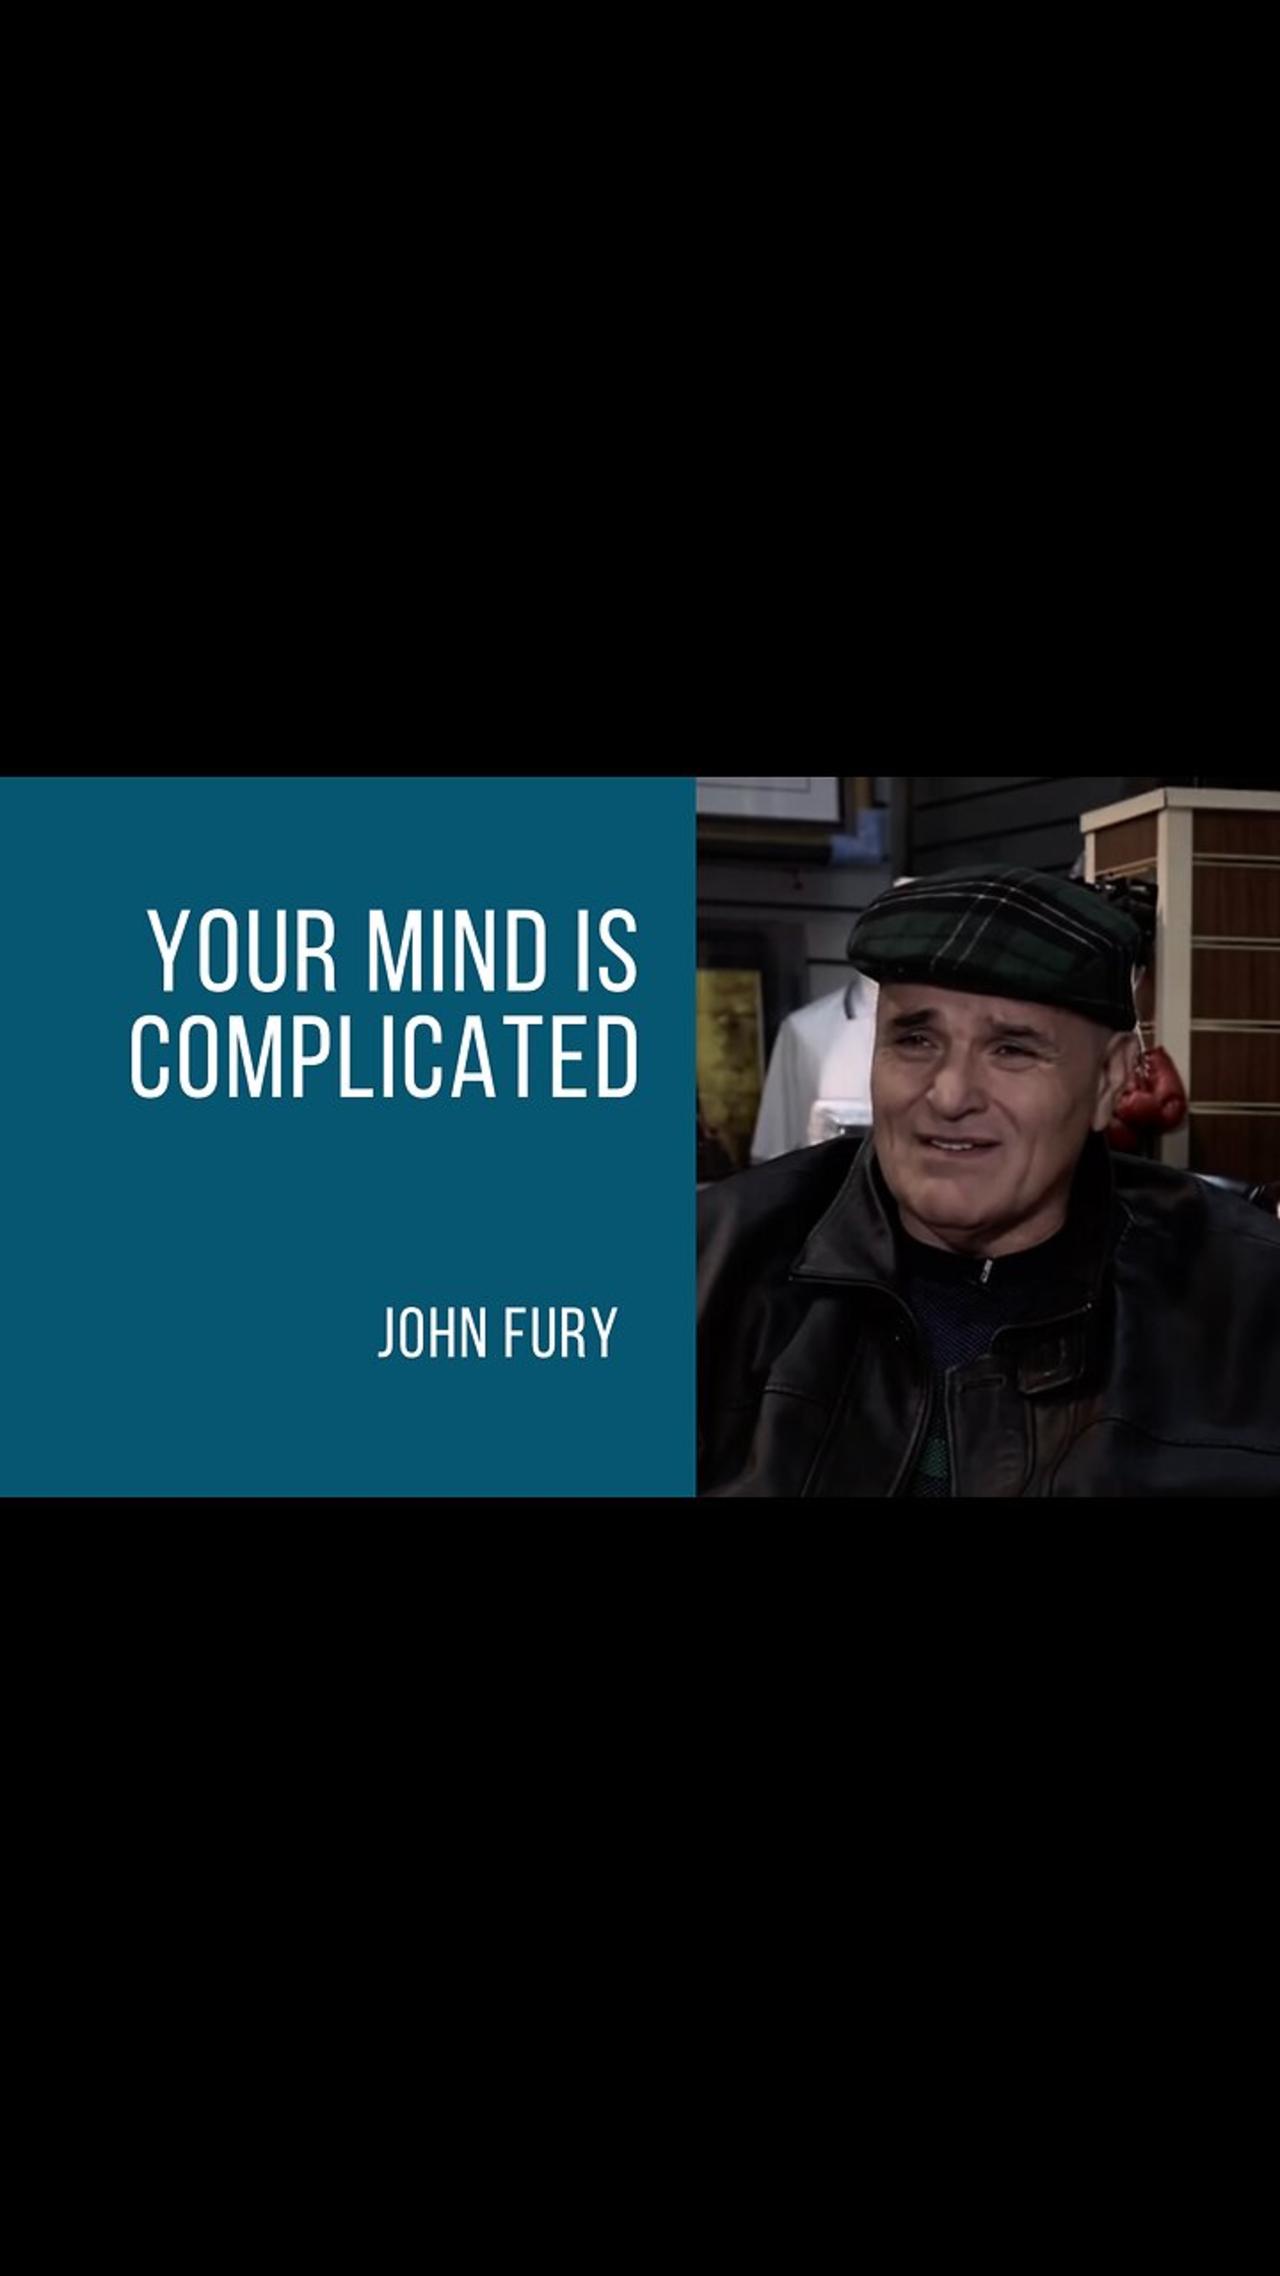 John Fury | Your Mind is a Complicated Place